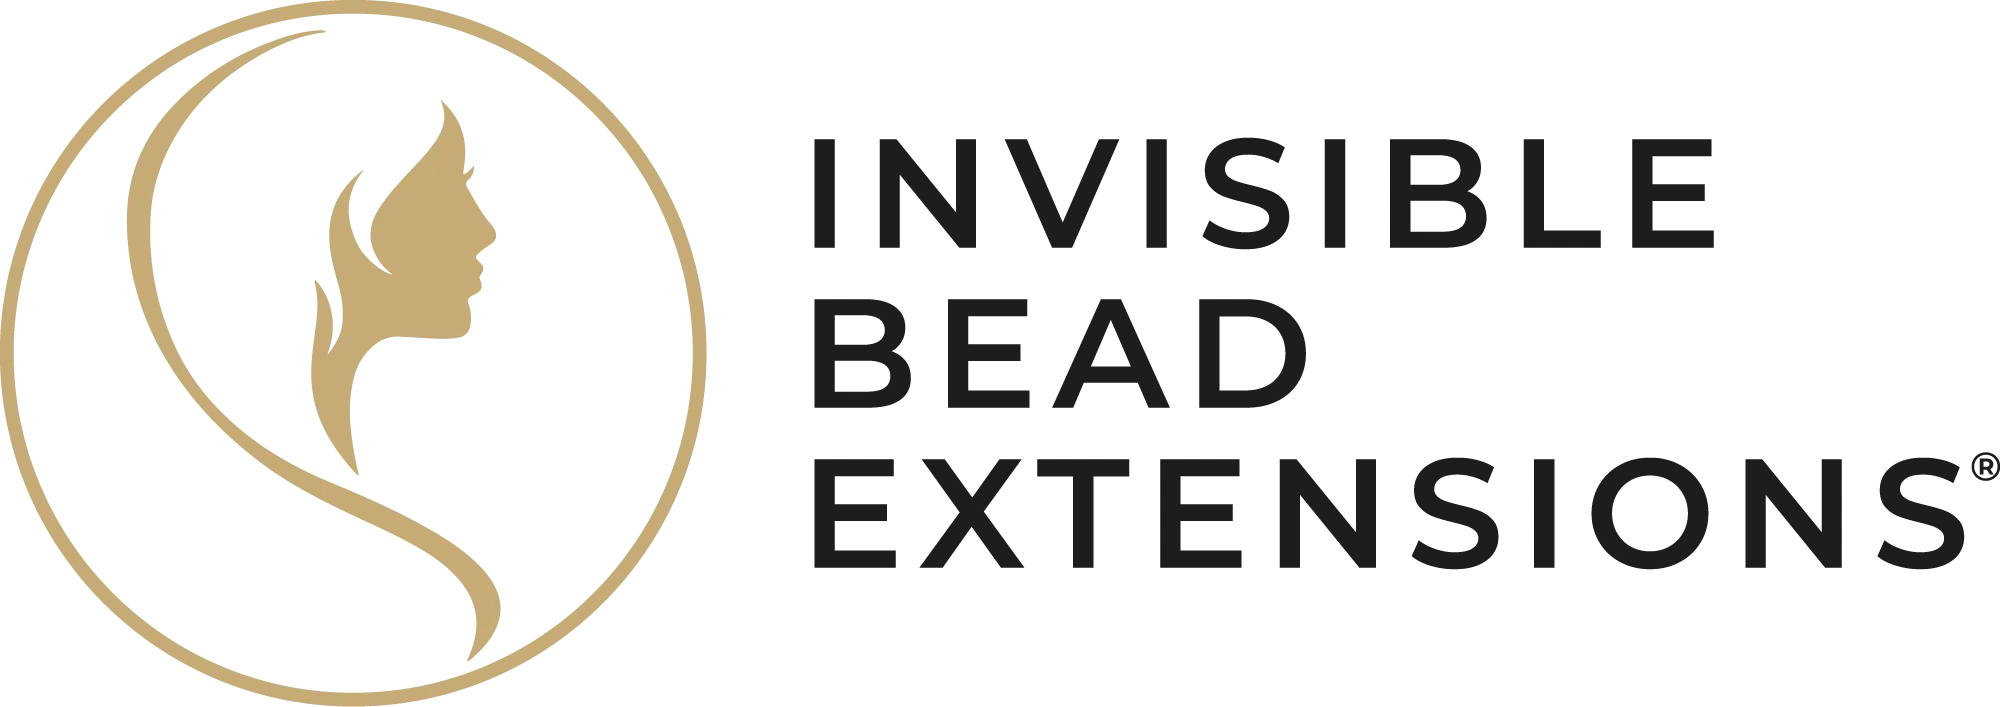 Invisible Bead Extensions Logo